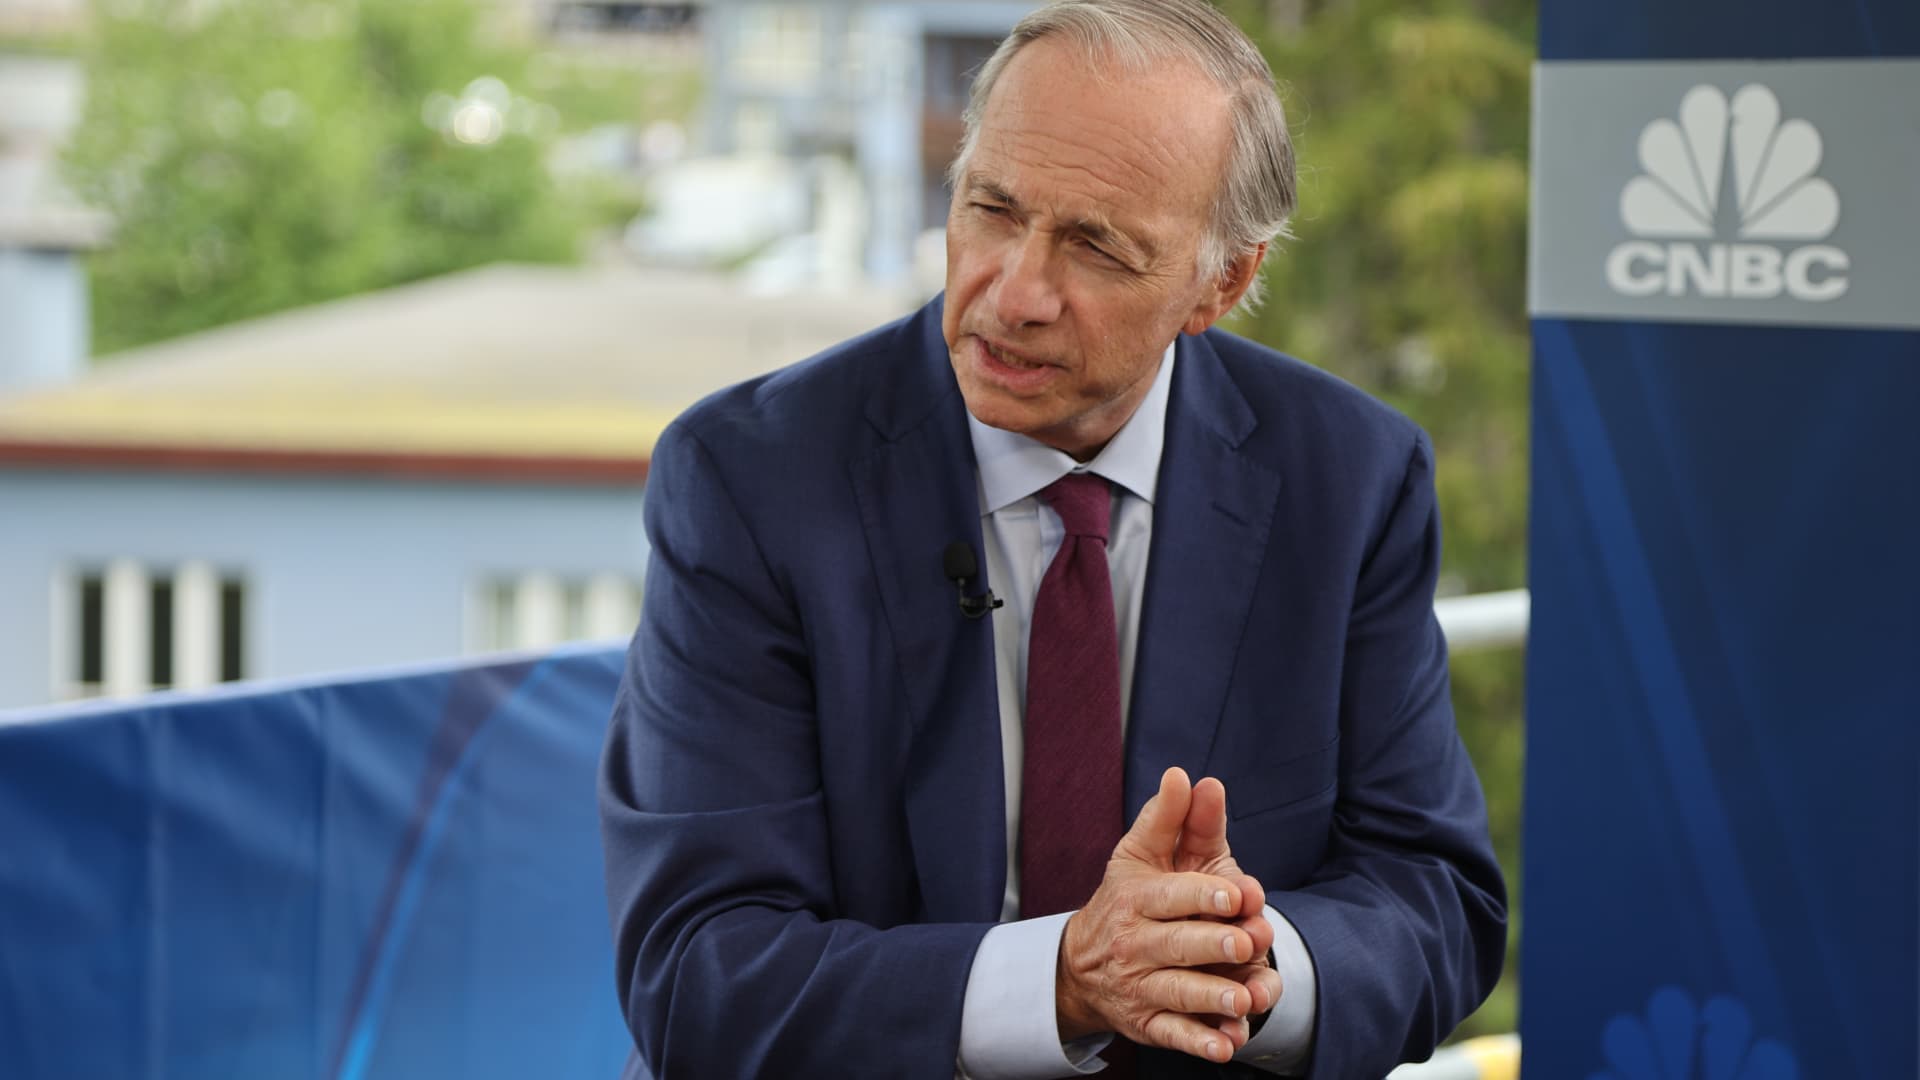 Dalio is right to short Europe, strategist says: ‘The pain will go on for quite a whereas’